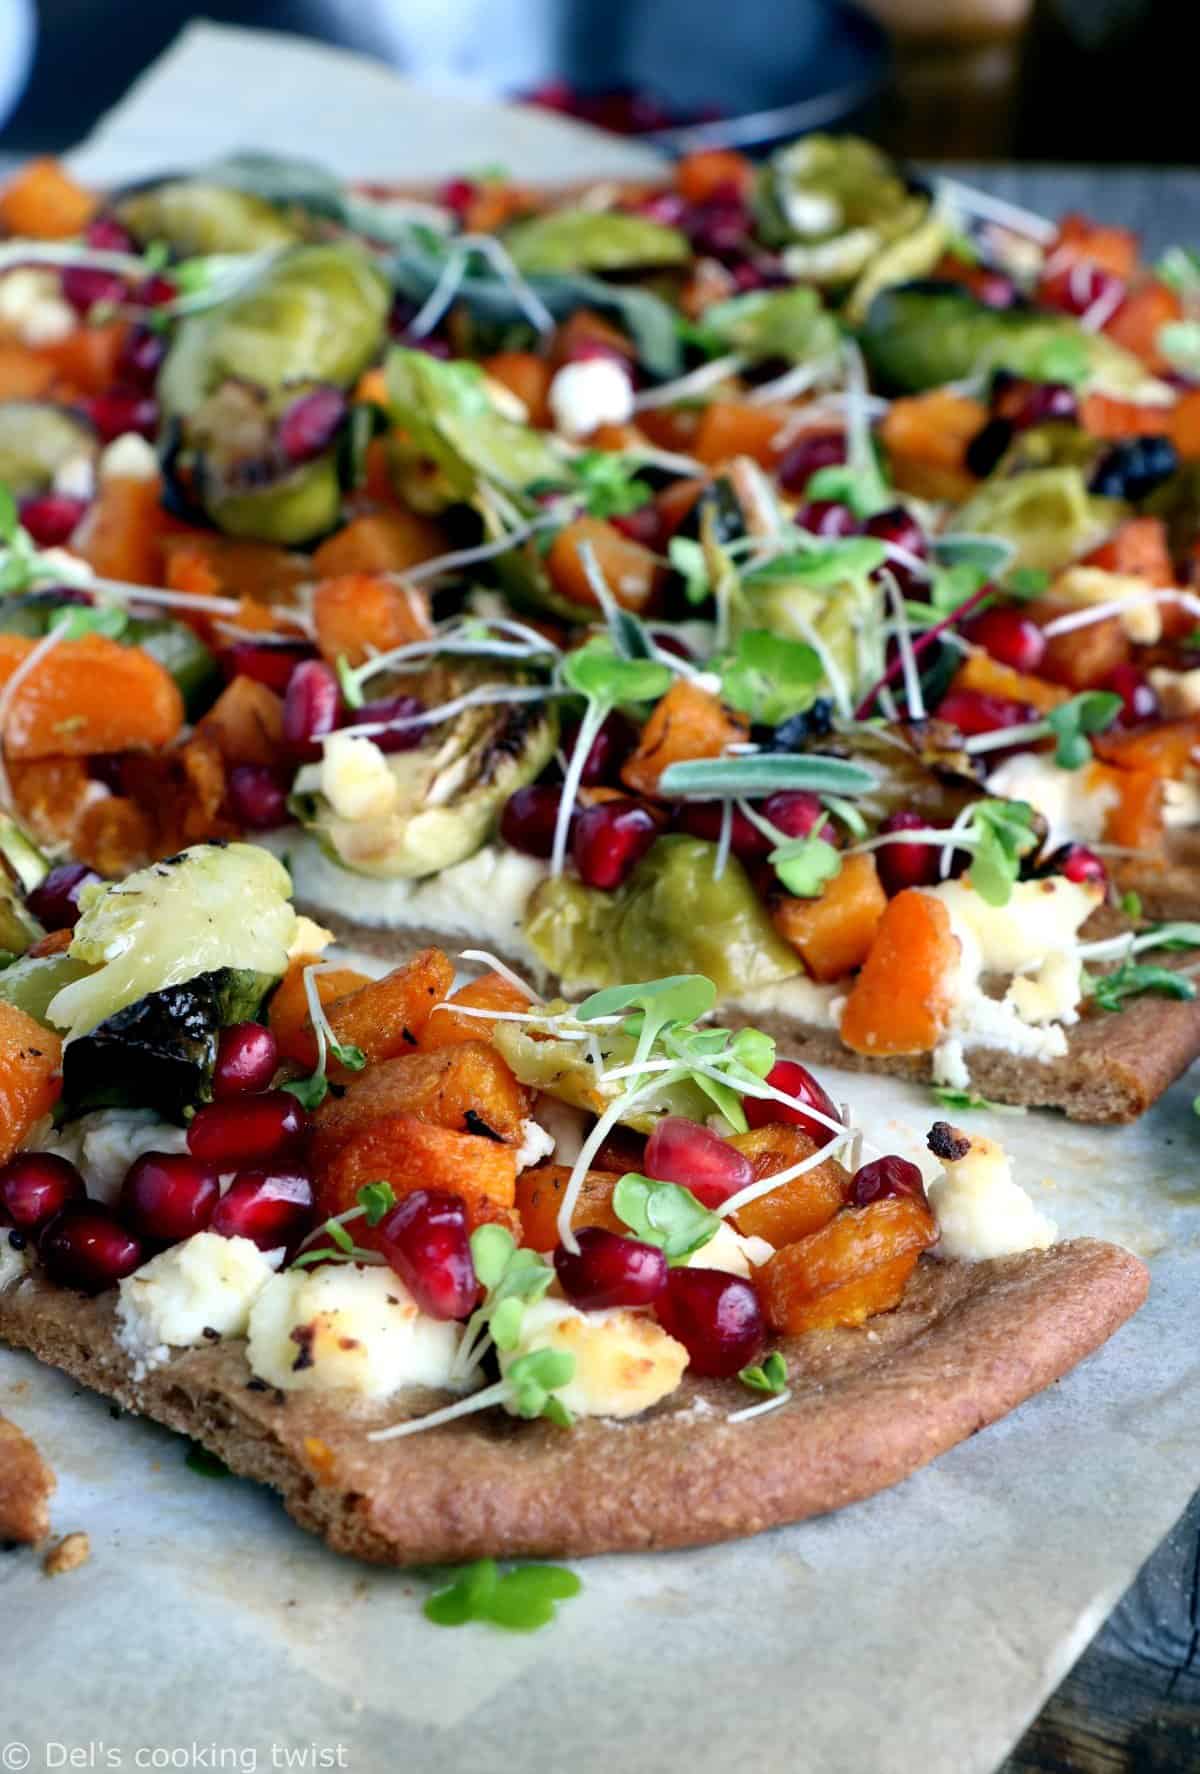 Butternut Squash and Brussels Sprout Whole Wheat Pizza